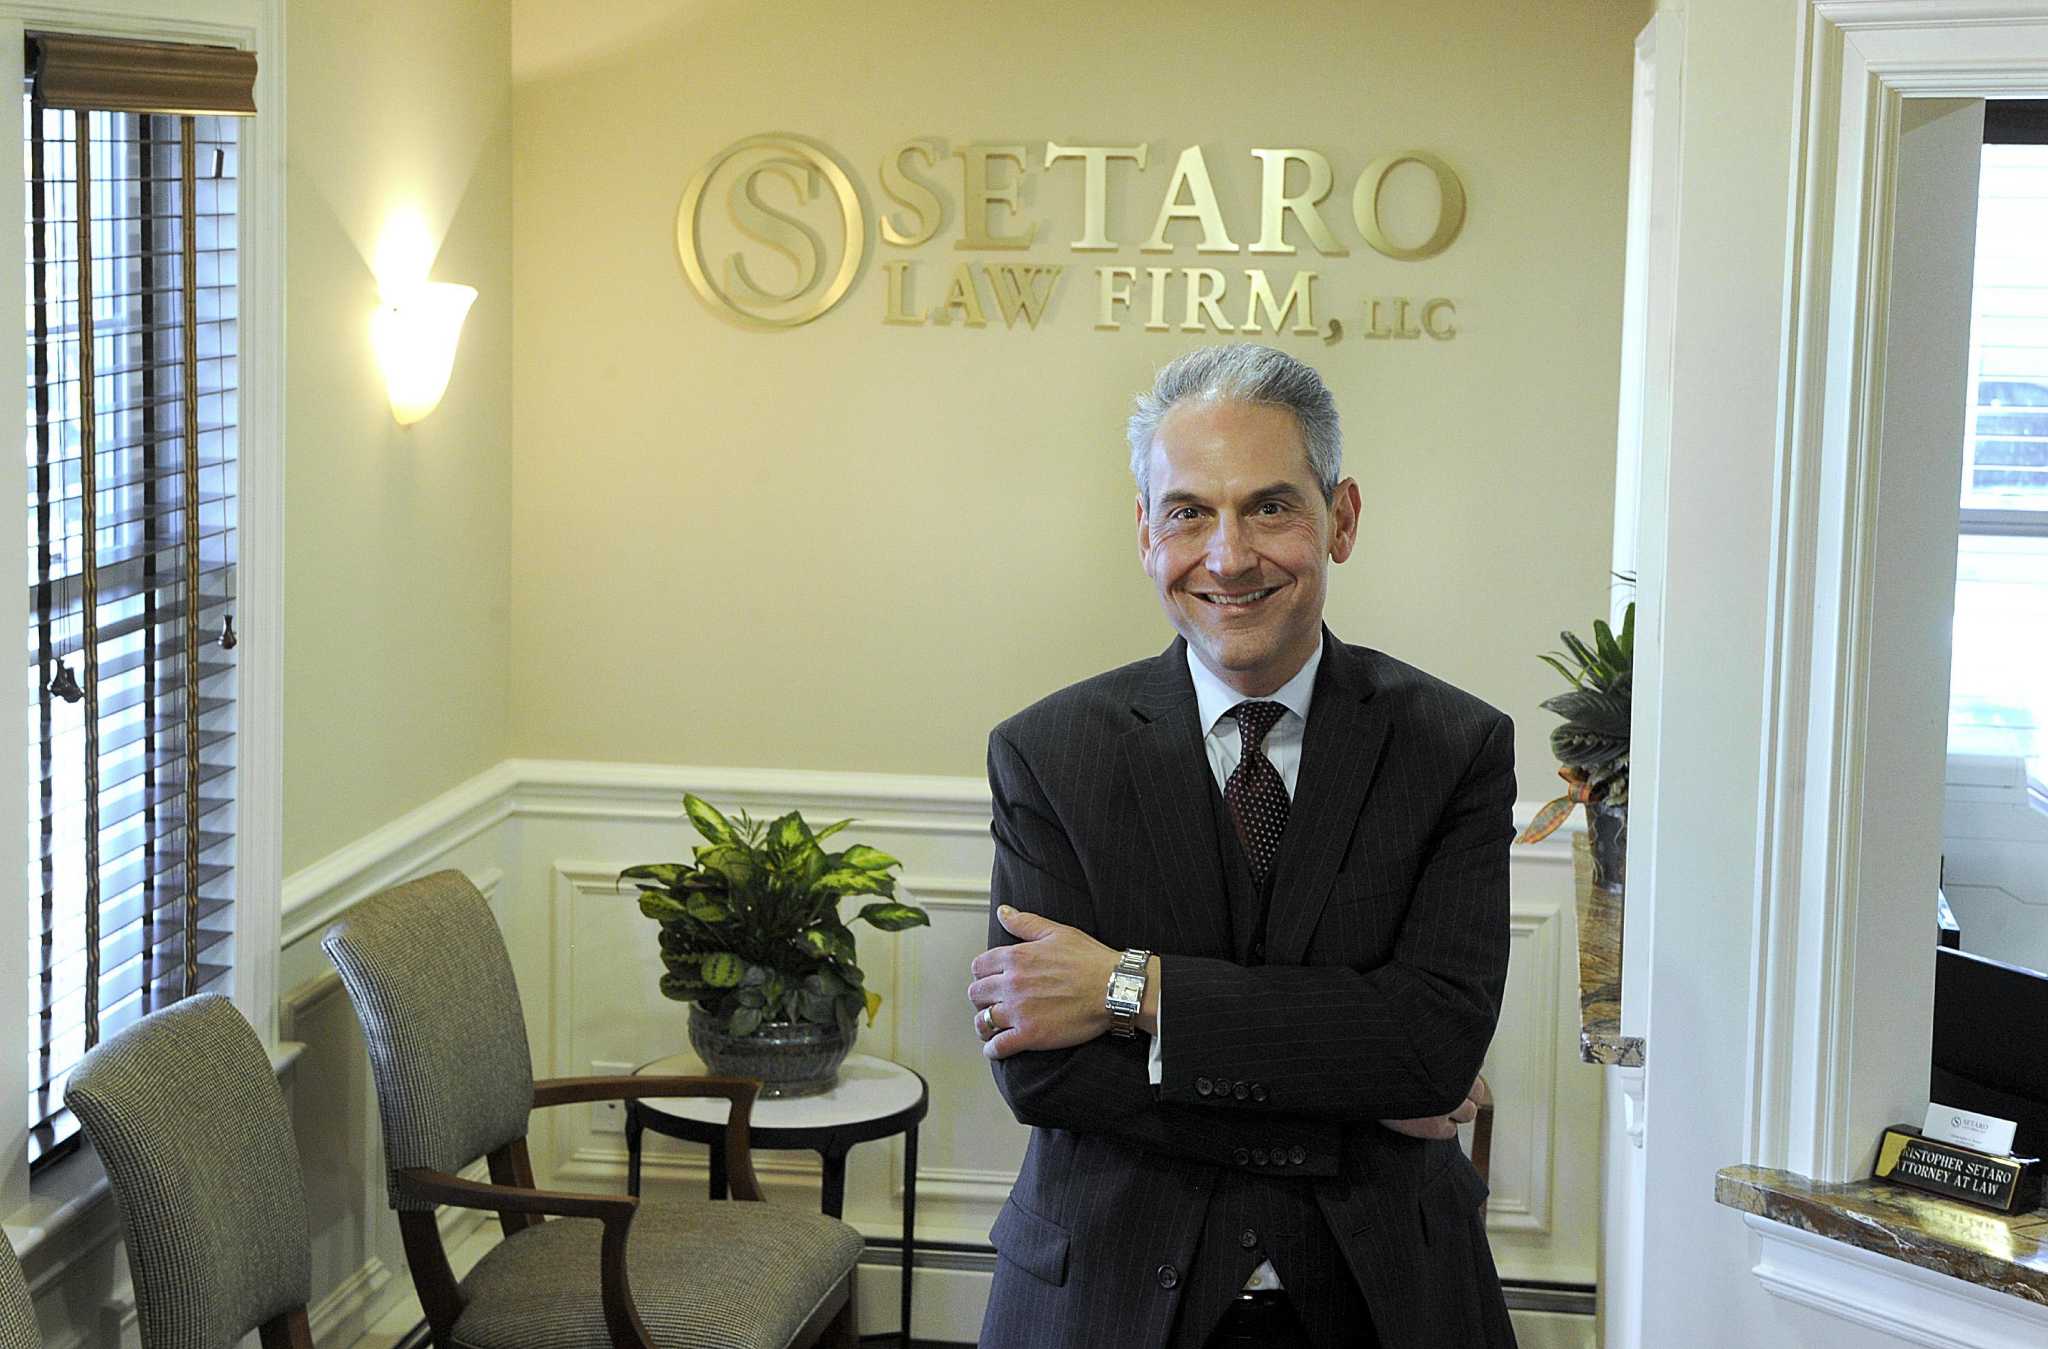 Setaro sets out to establish own law firm in Danbury